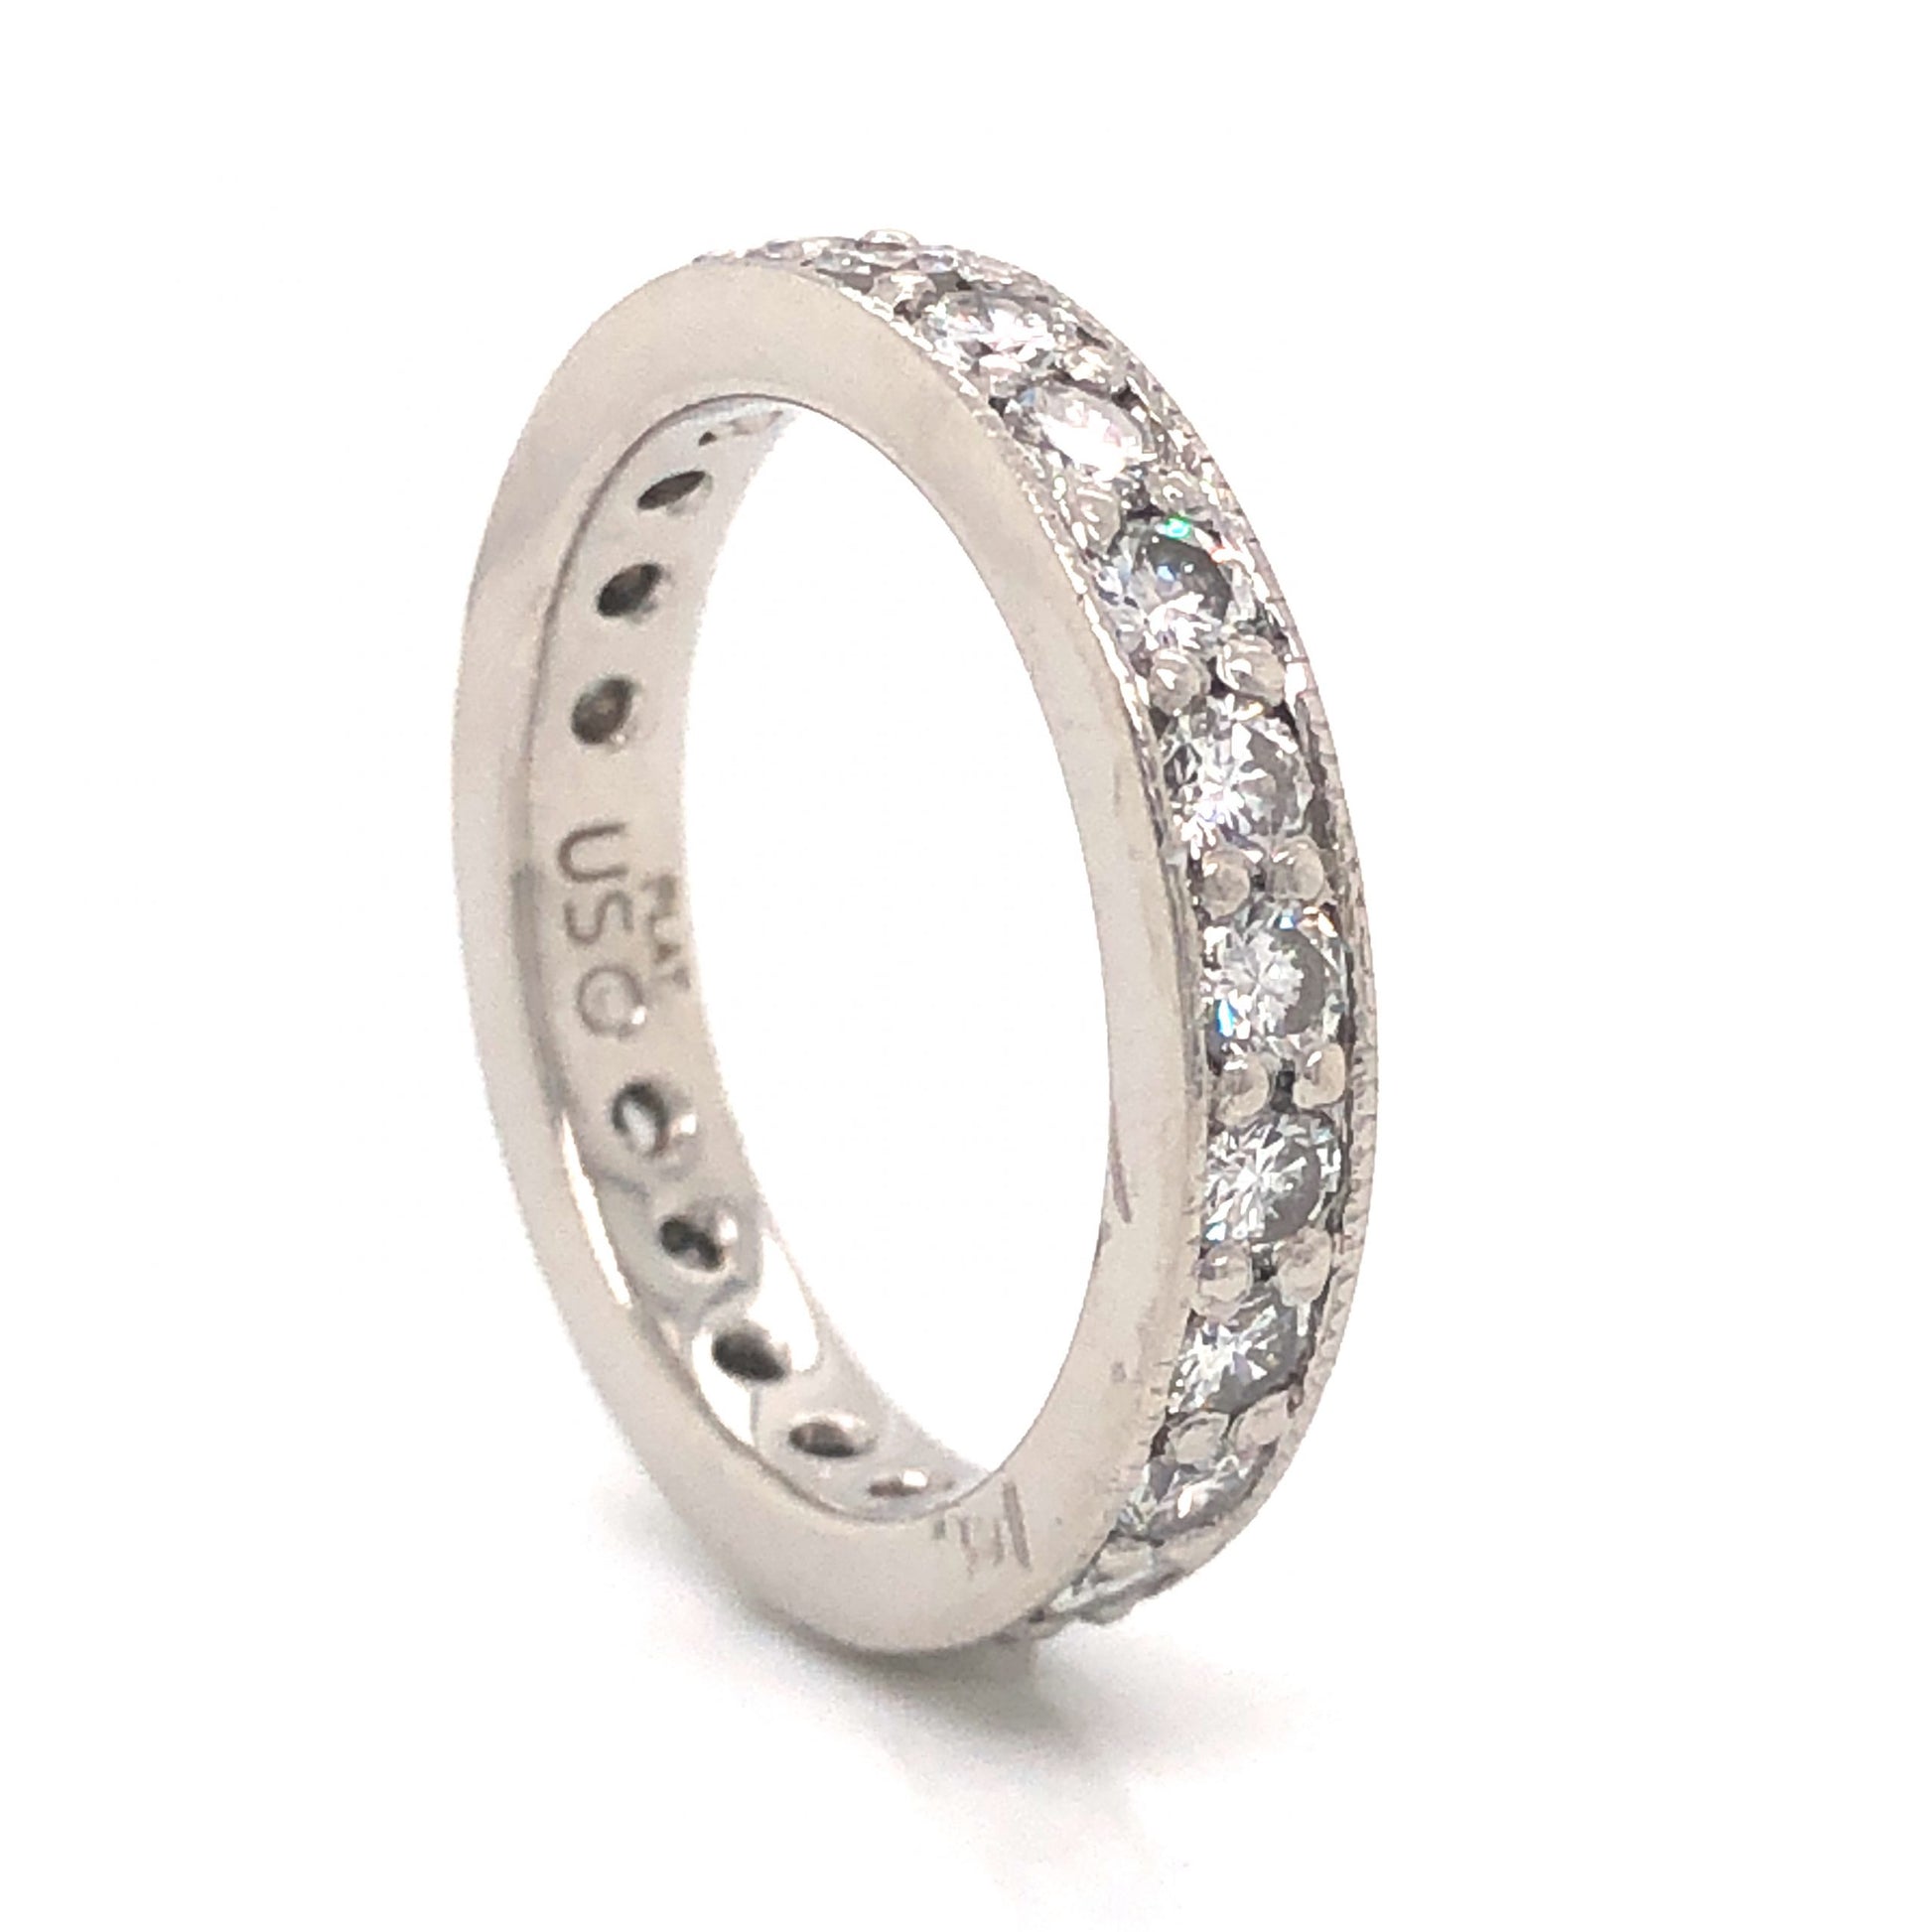 Antique Inspired Diamond Eternity Band in PlatinumComposition: Platinum Ring Size: 5.75 Total Diamond Weight: .80ct Total Gram Weight: 6.7 g Inscription: PLAT US
      